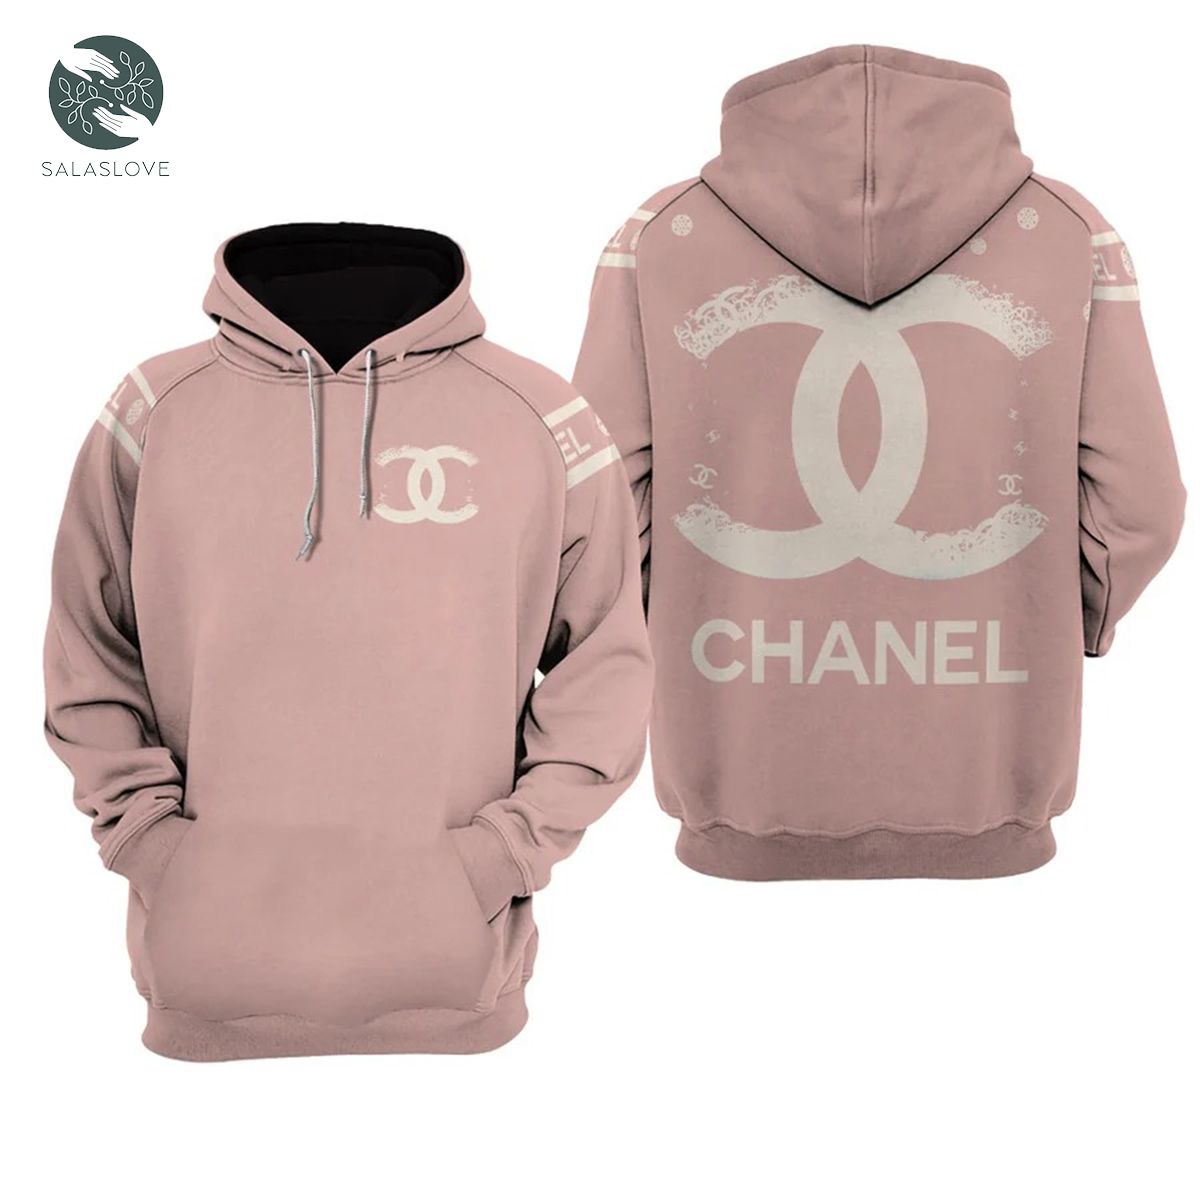 Chanel Pastel Unisex Hoodie For Men Women Luxury Brand Outfit